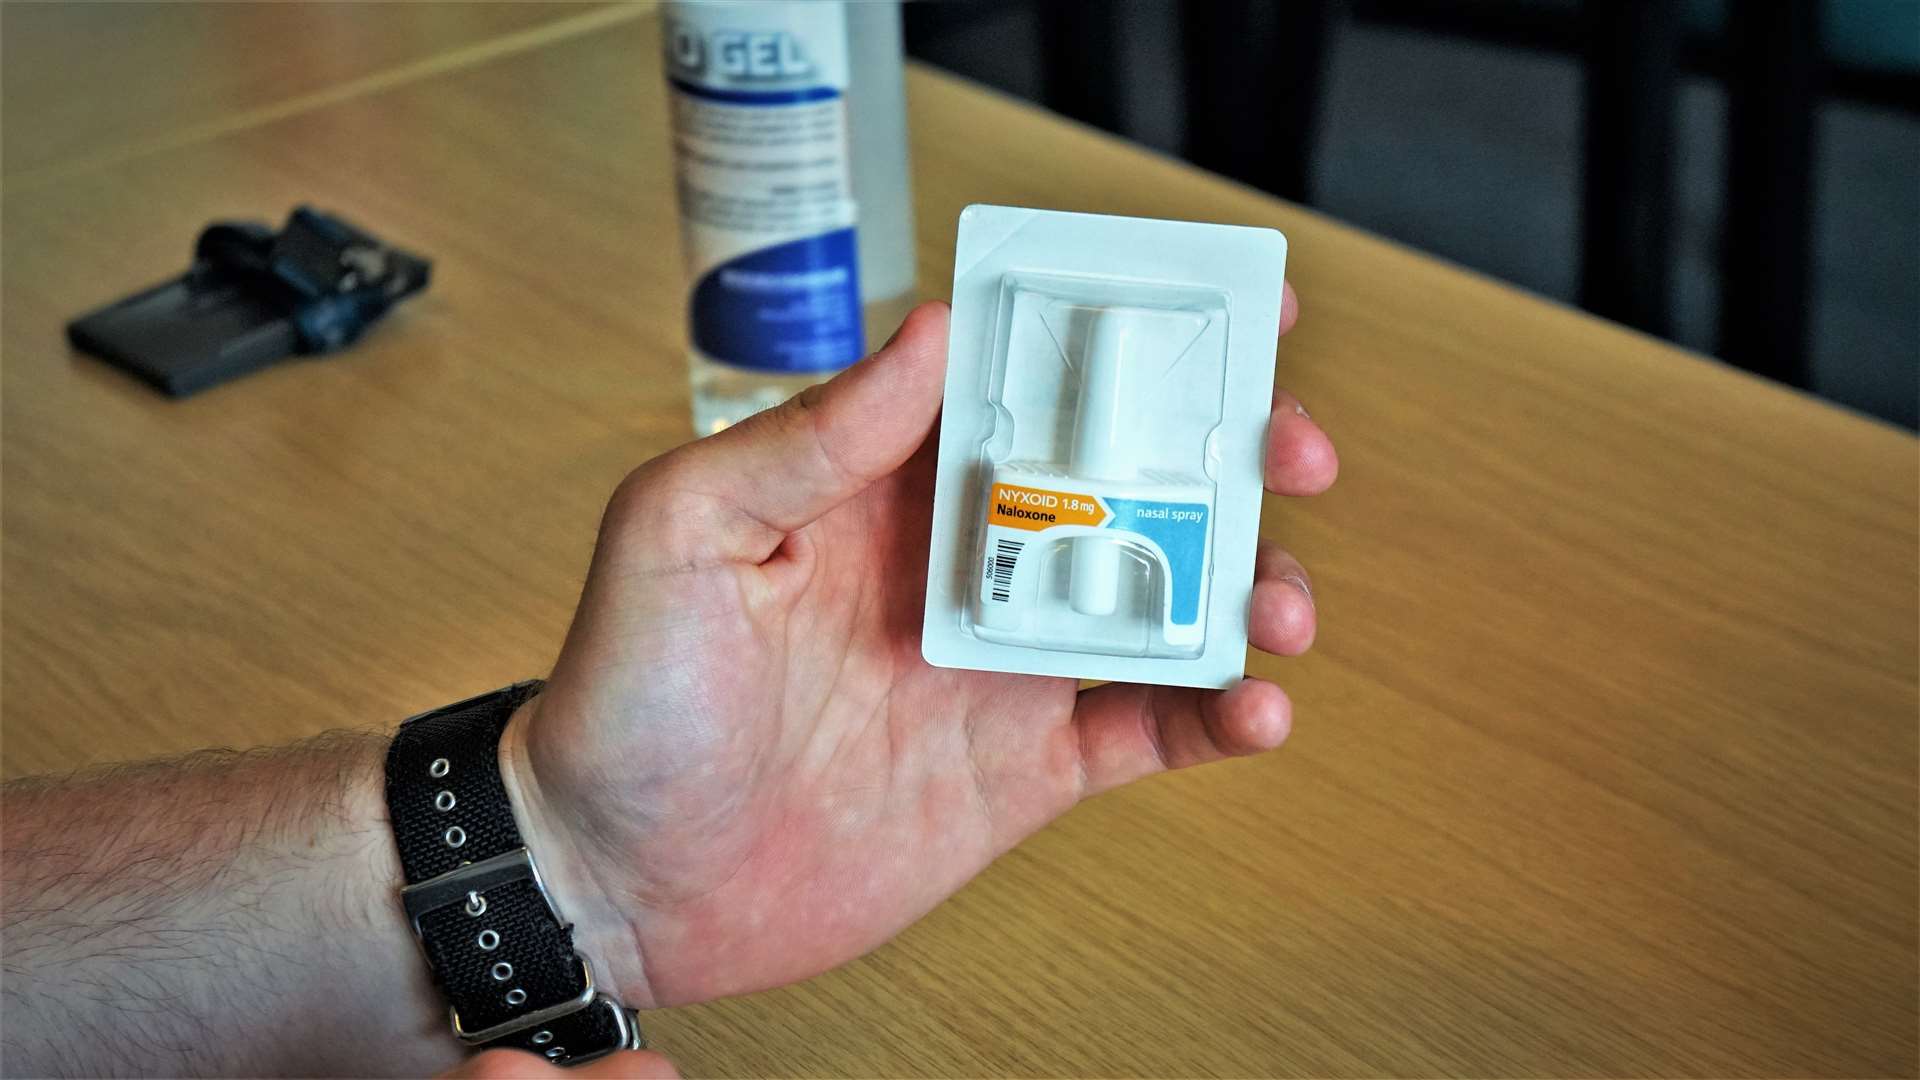 Naloxone dispenser which can temporarily reverse the effects of opiate overdose until medical assistance is accessed. Pictures: DGS